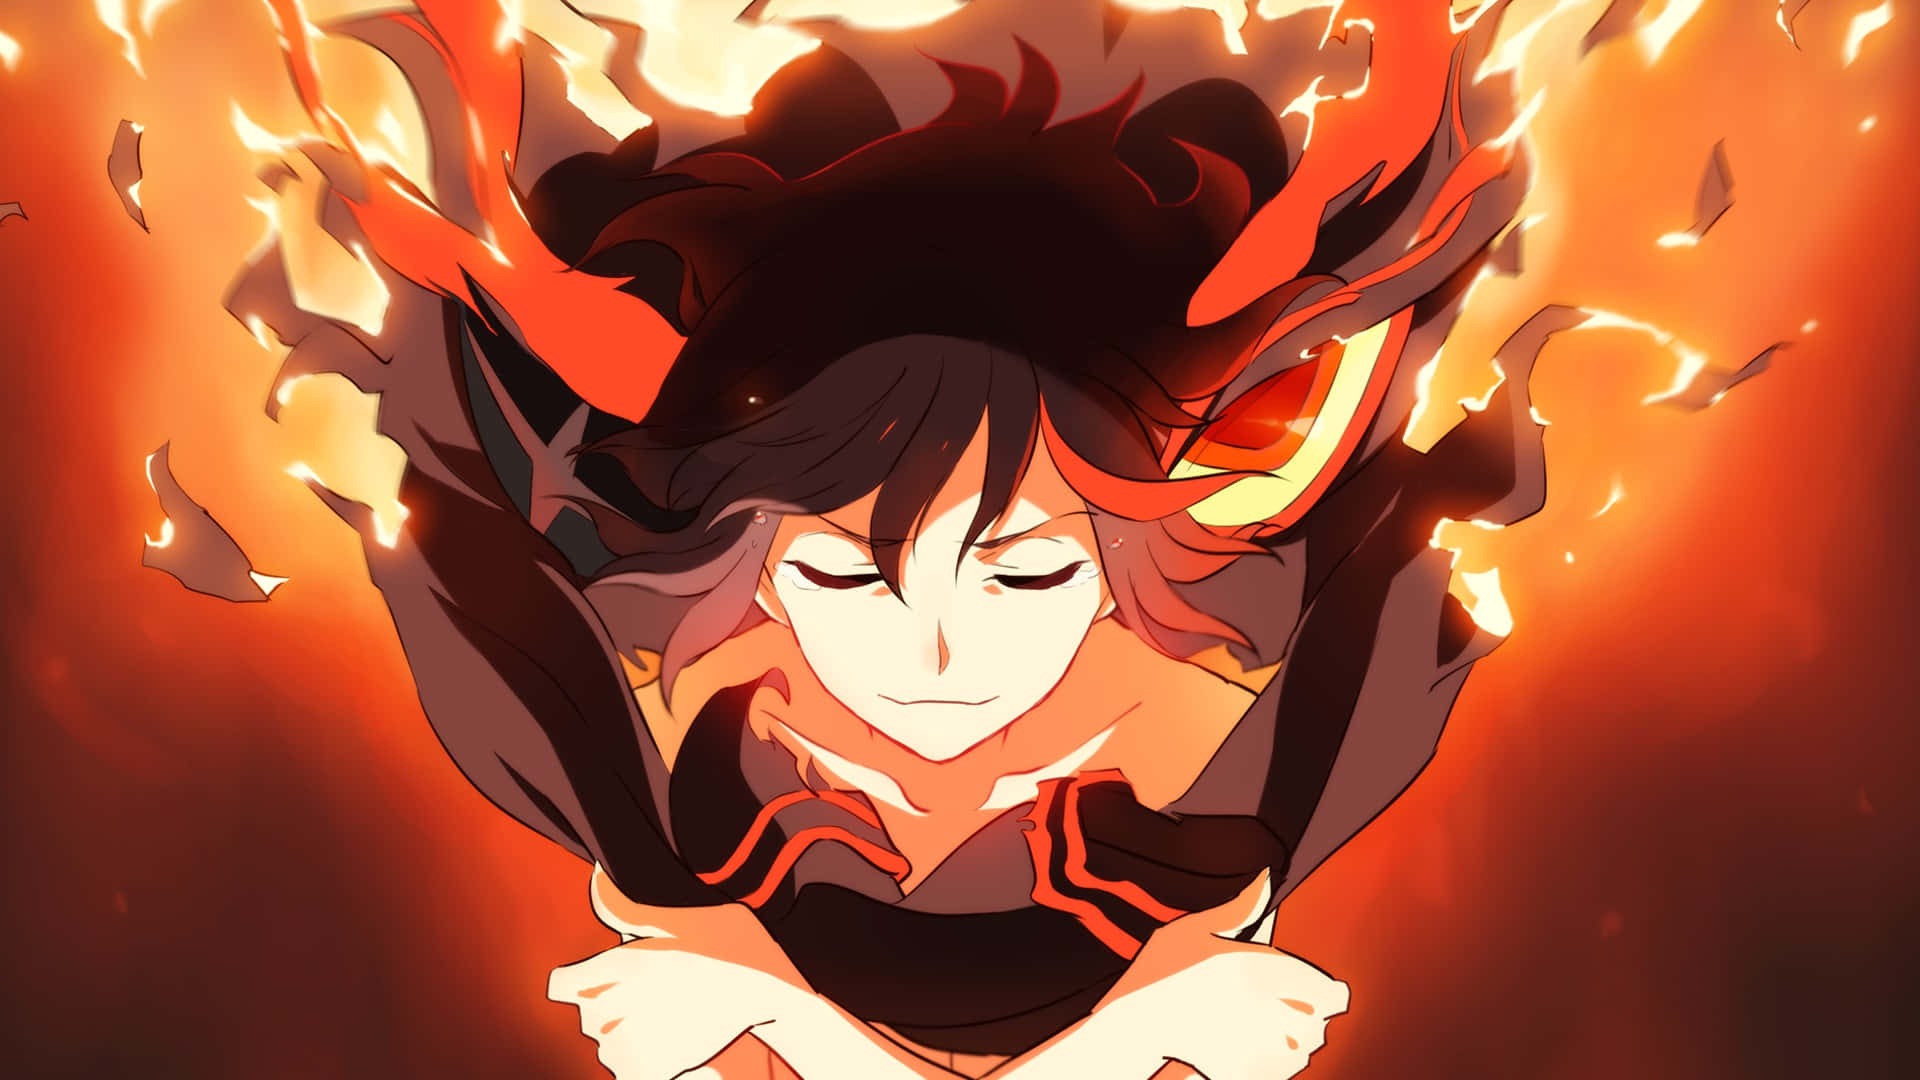 Ryuko Matoi fiercely poses in her iconic outfit Wallpaper